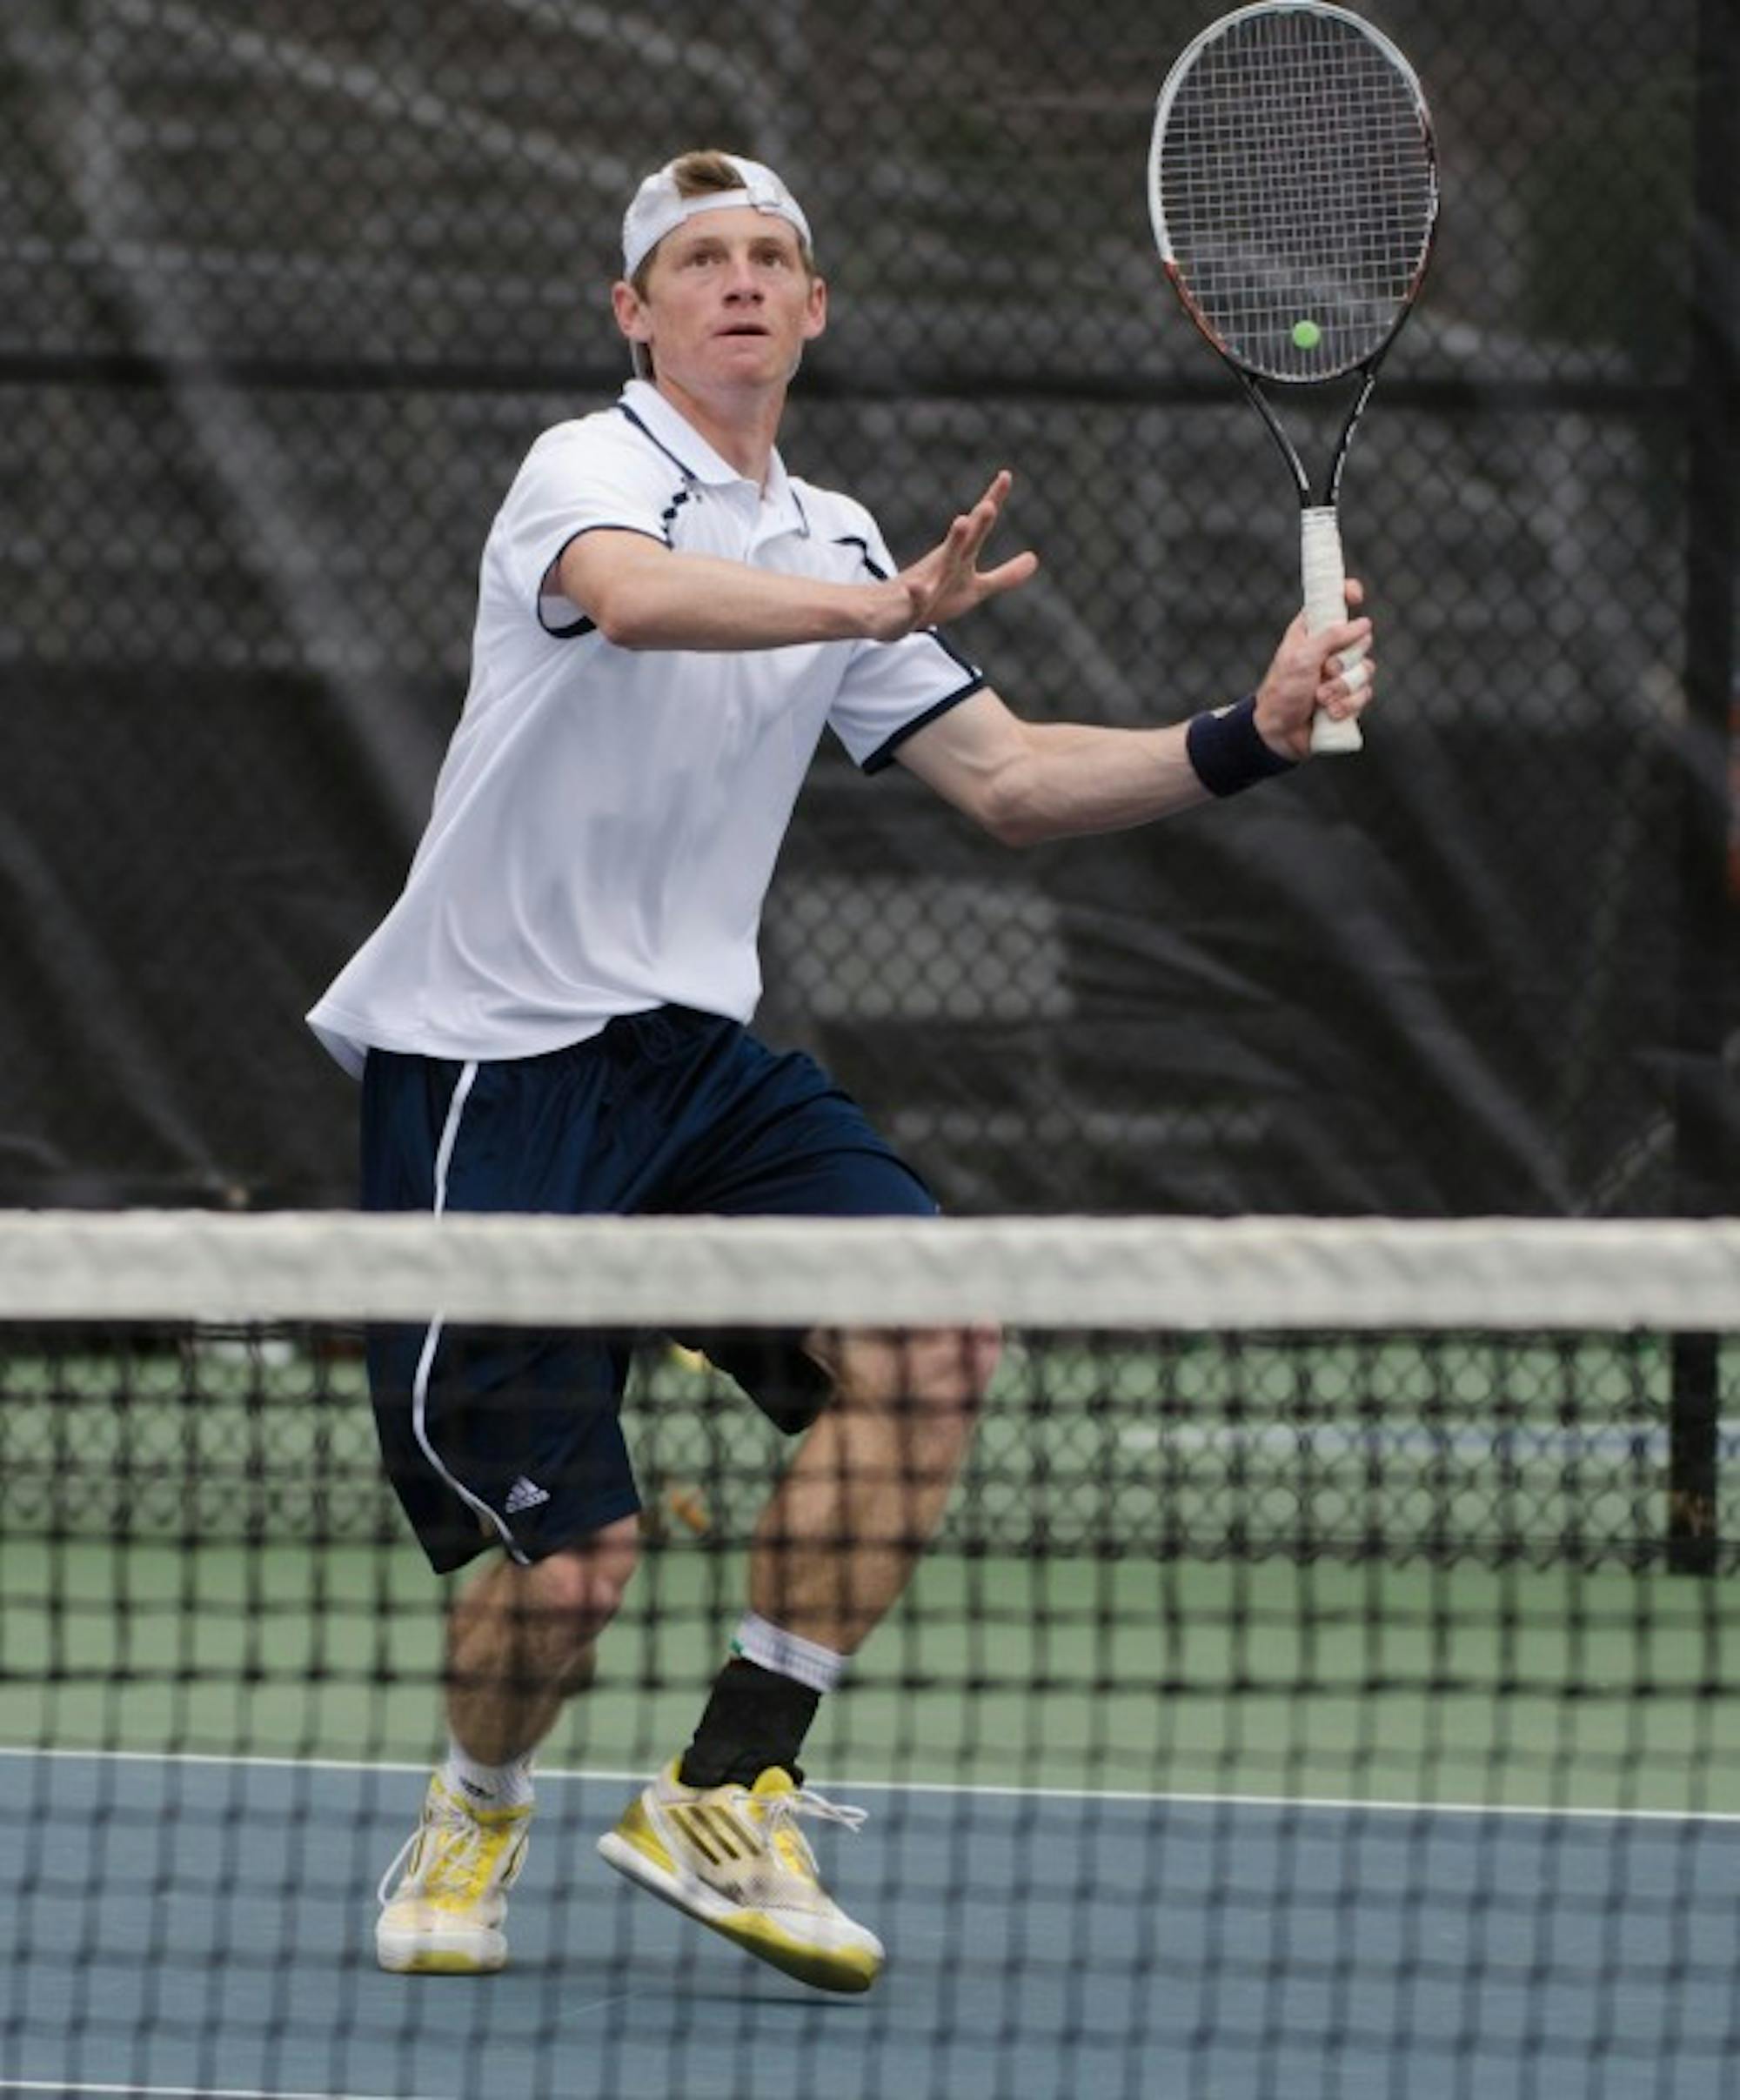 Irish junior Alex Lawson prepares to return a shot in Notre Dame’s 6-1 victory over Florida State on April 13. Lawson paired with senior Billy Pecor to earn an 8-5 doubles win in the match.